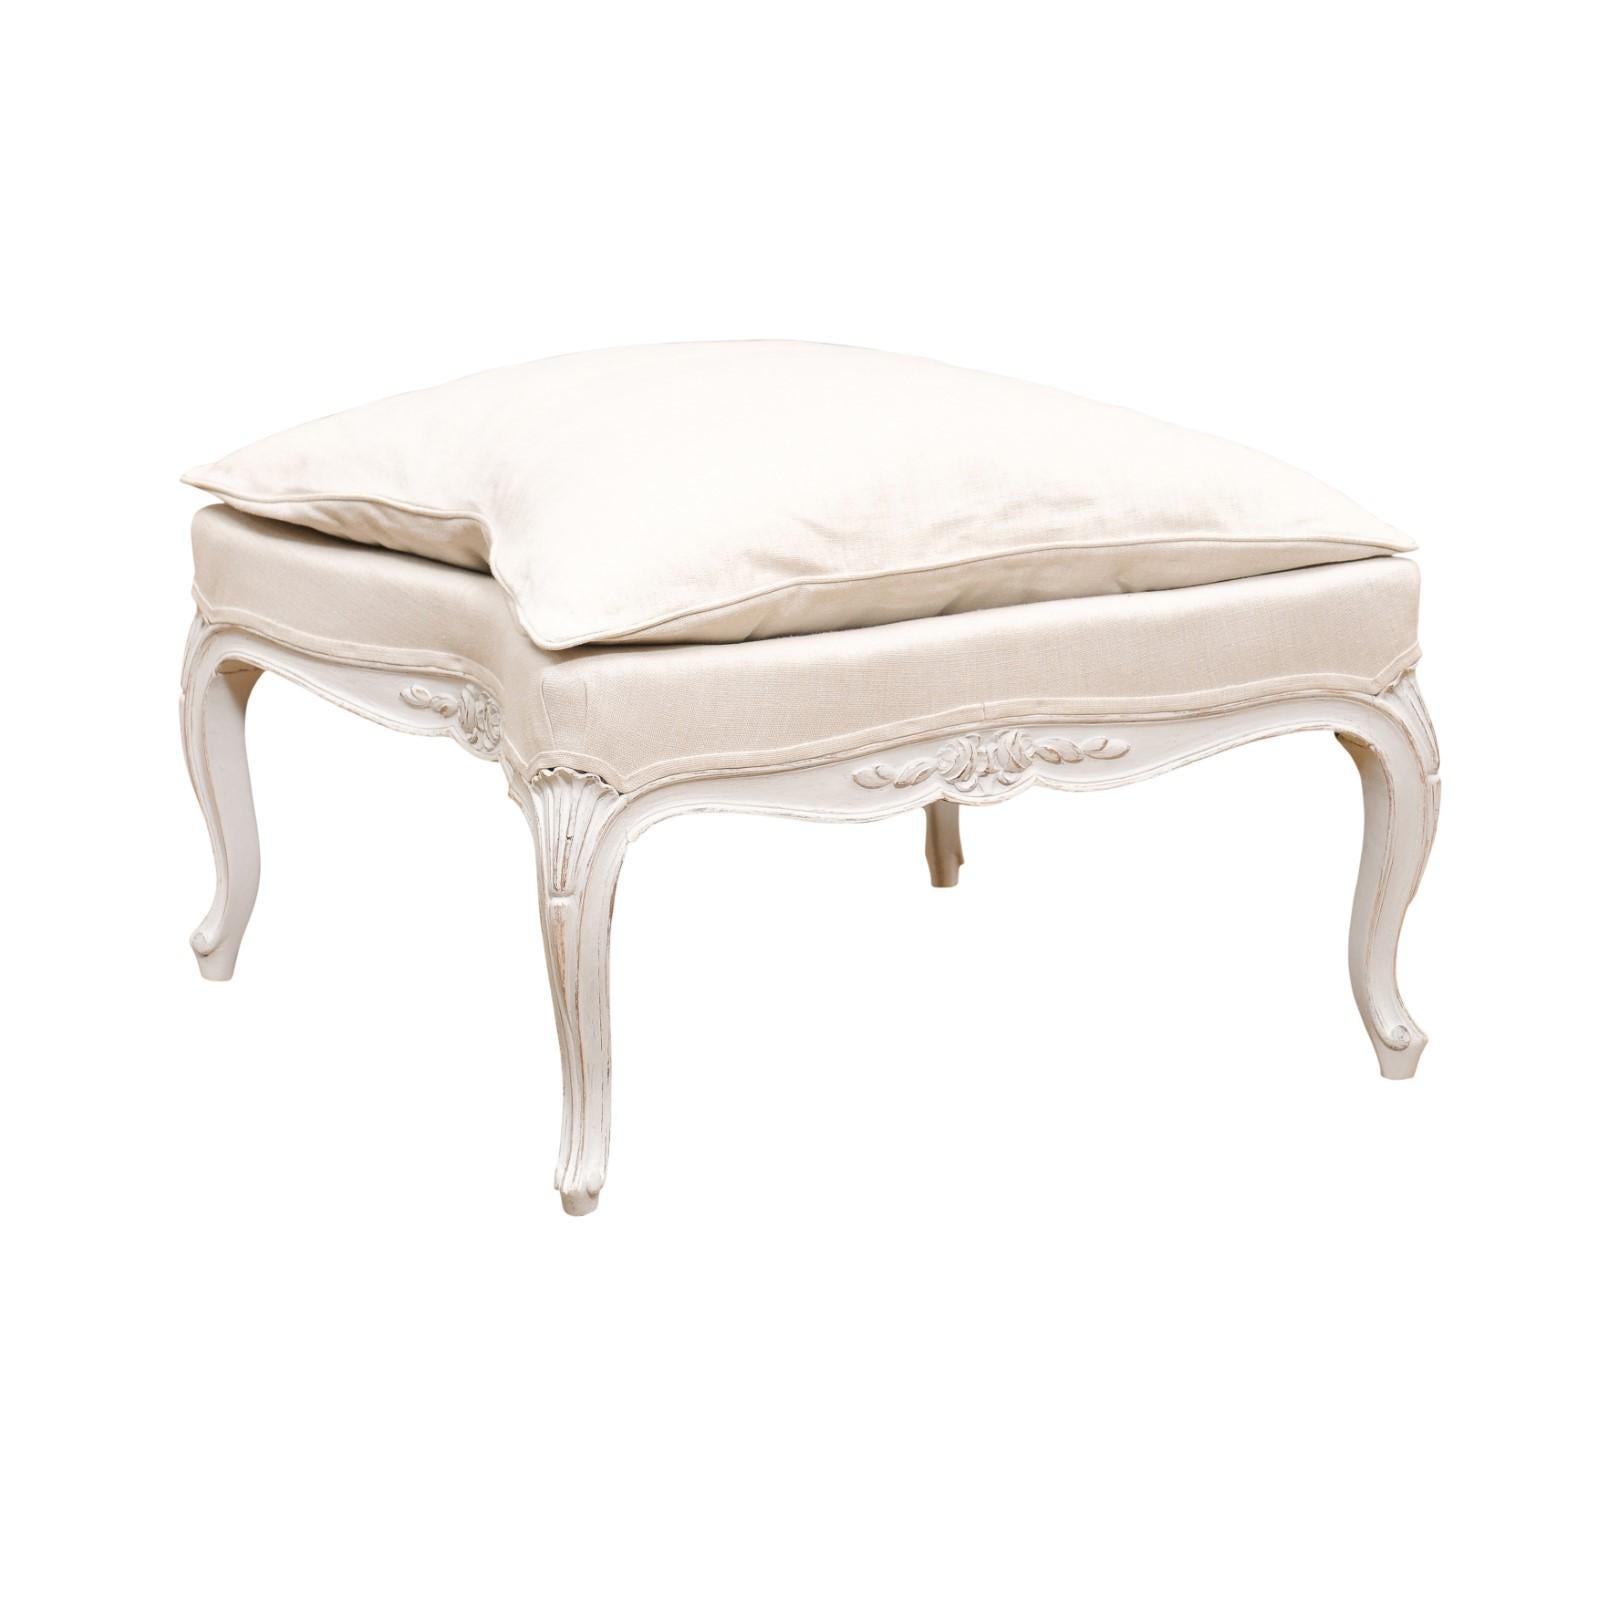 A Swedish Rococo Revival painted wooden stool from the late 19th century, with cabriole legs, carved motifs and new upholstery. Created in Sweden during the last decade of the 19th century, this painted stool features a square seat topped with a